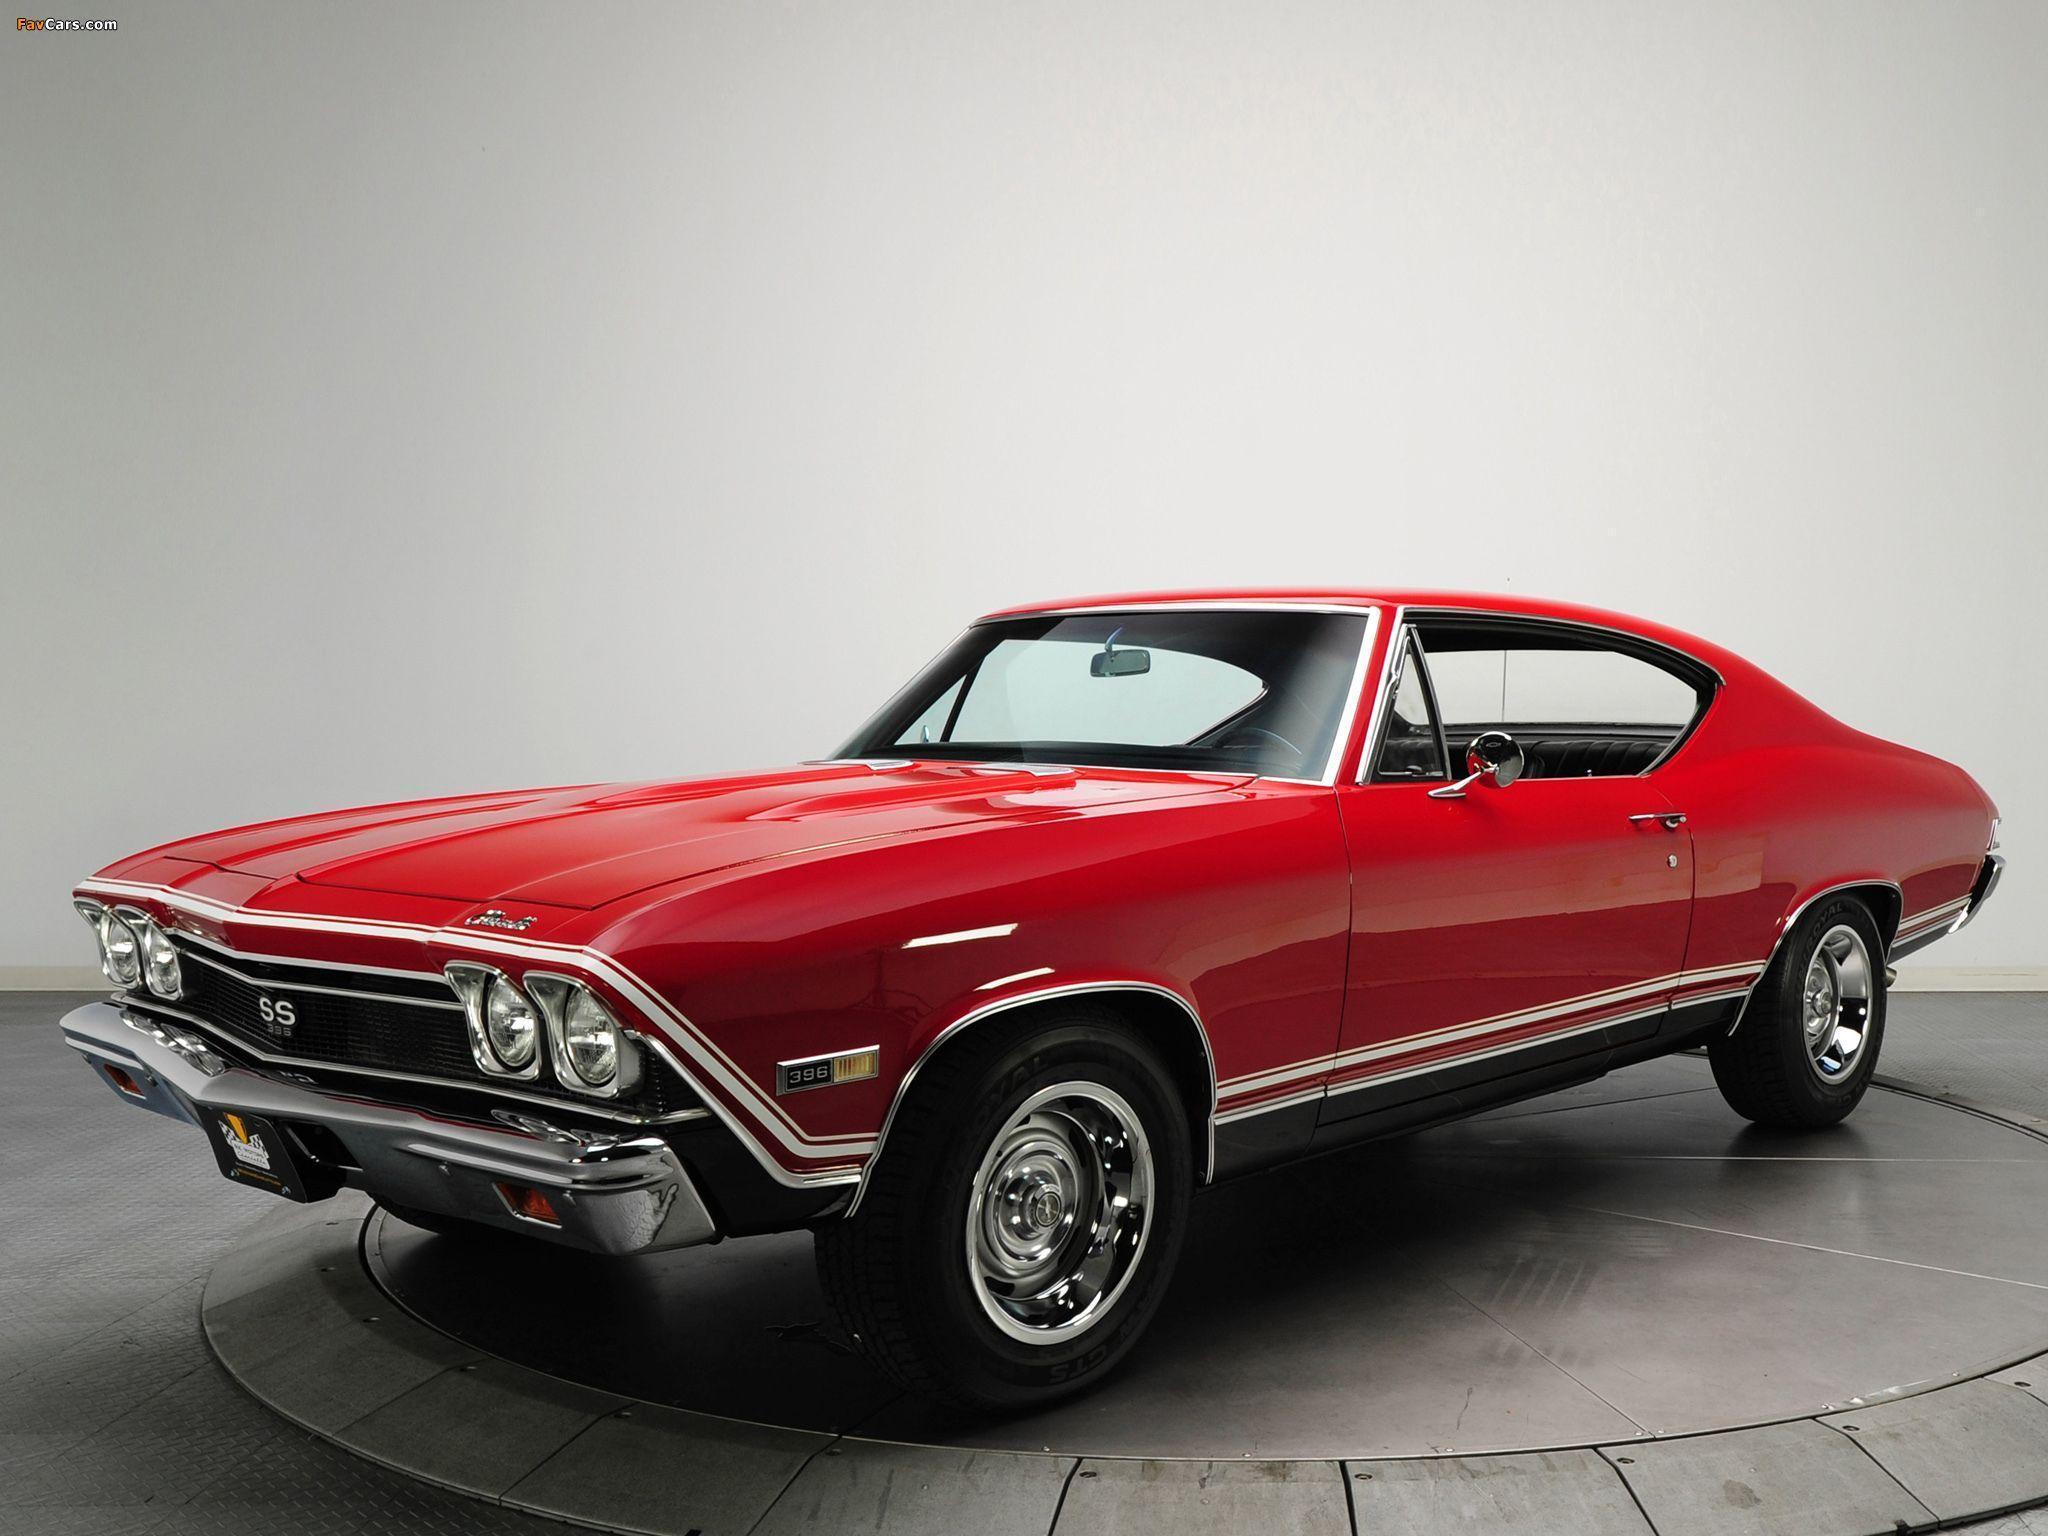 Chevelle SS 396 L78 1968 wallpapers.